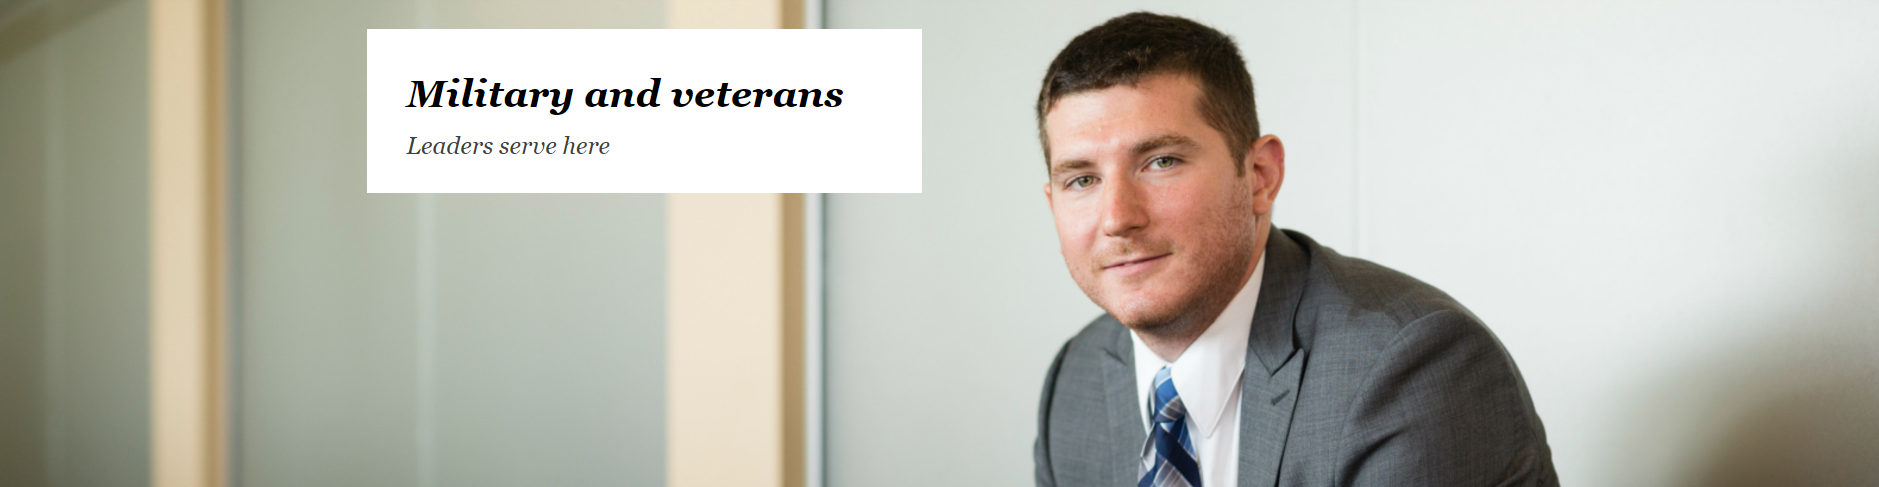 PwC employers for veterans